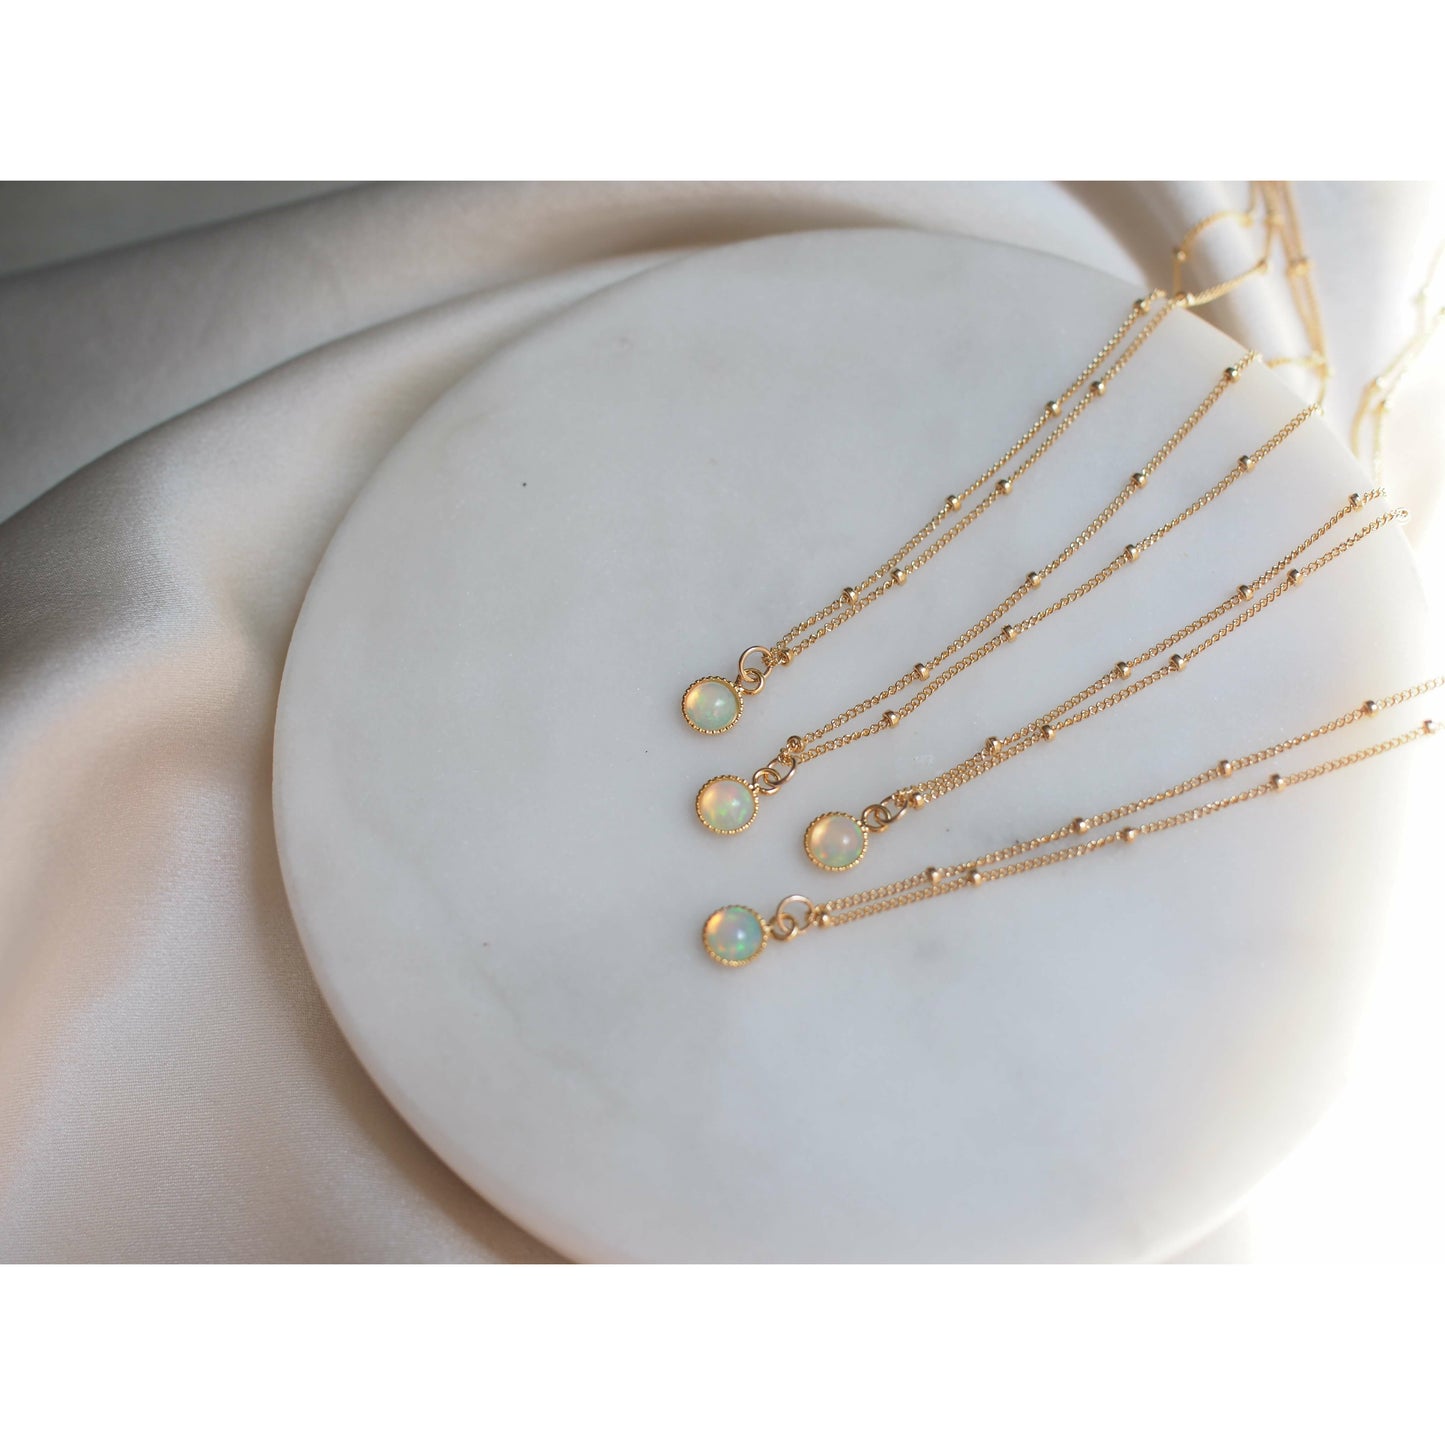 Dainty opal chokers on a dotted gold fill chain shown on a marble backdrop